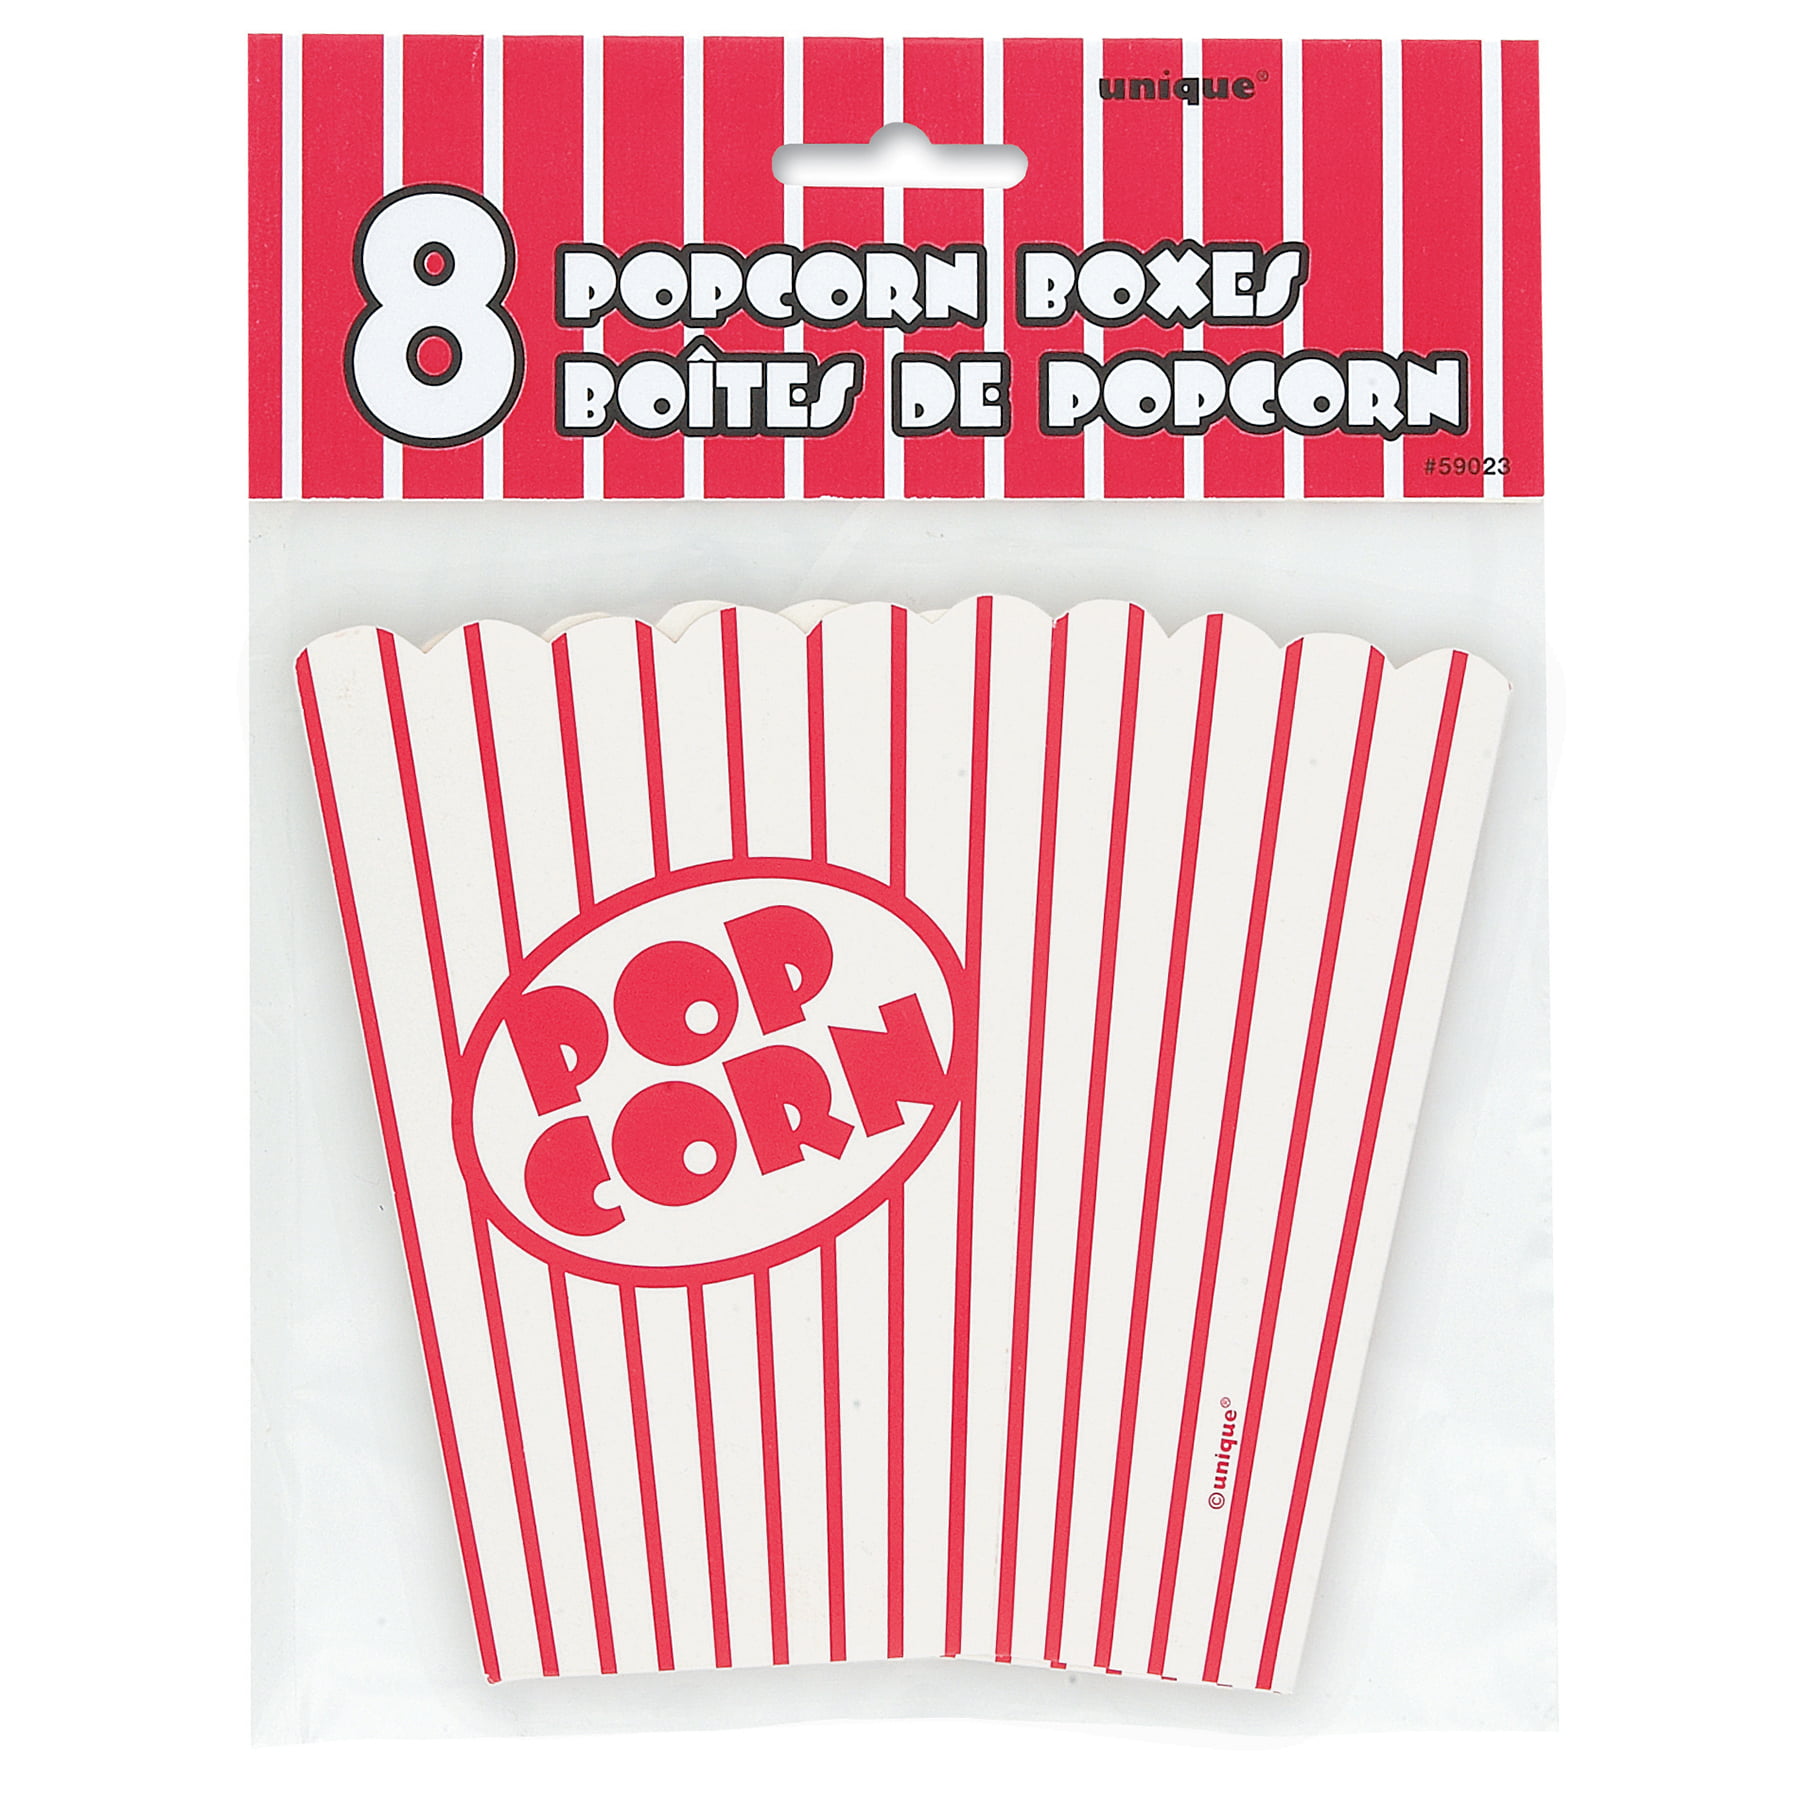 2 X Small Popcorn Boxes Pack of 8 